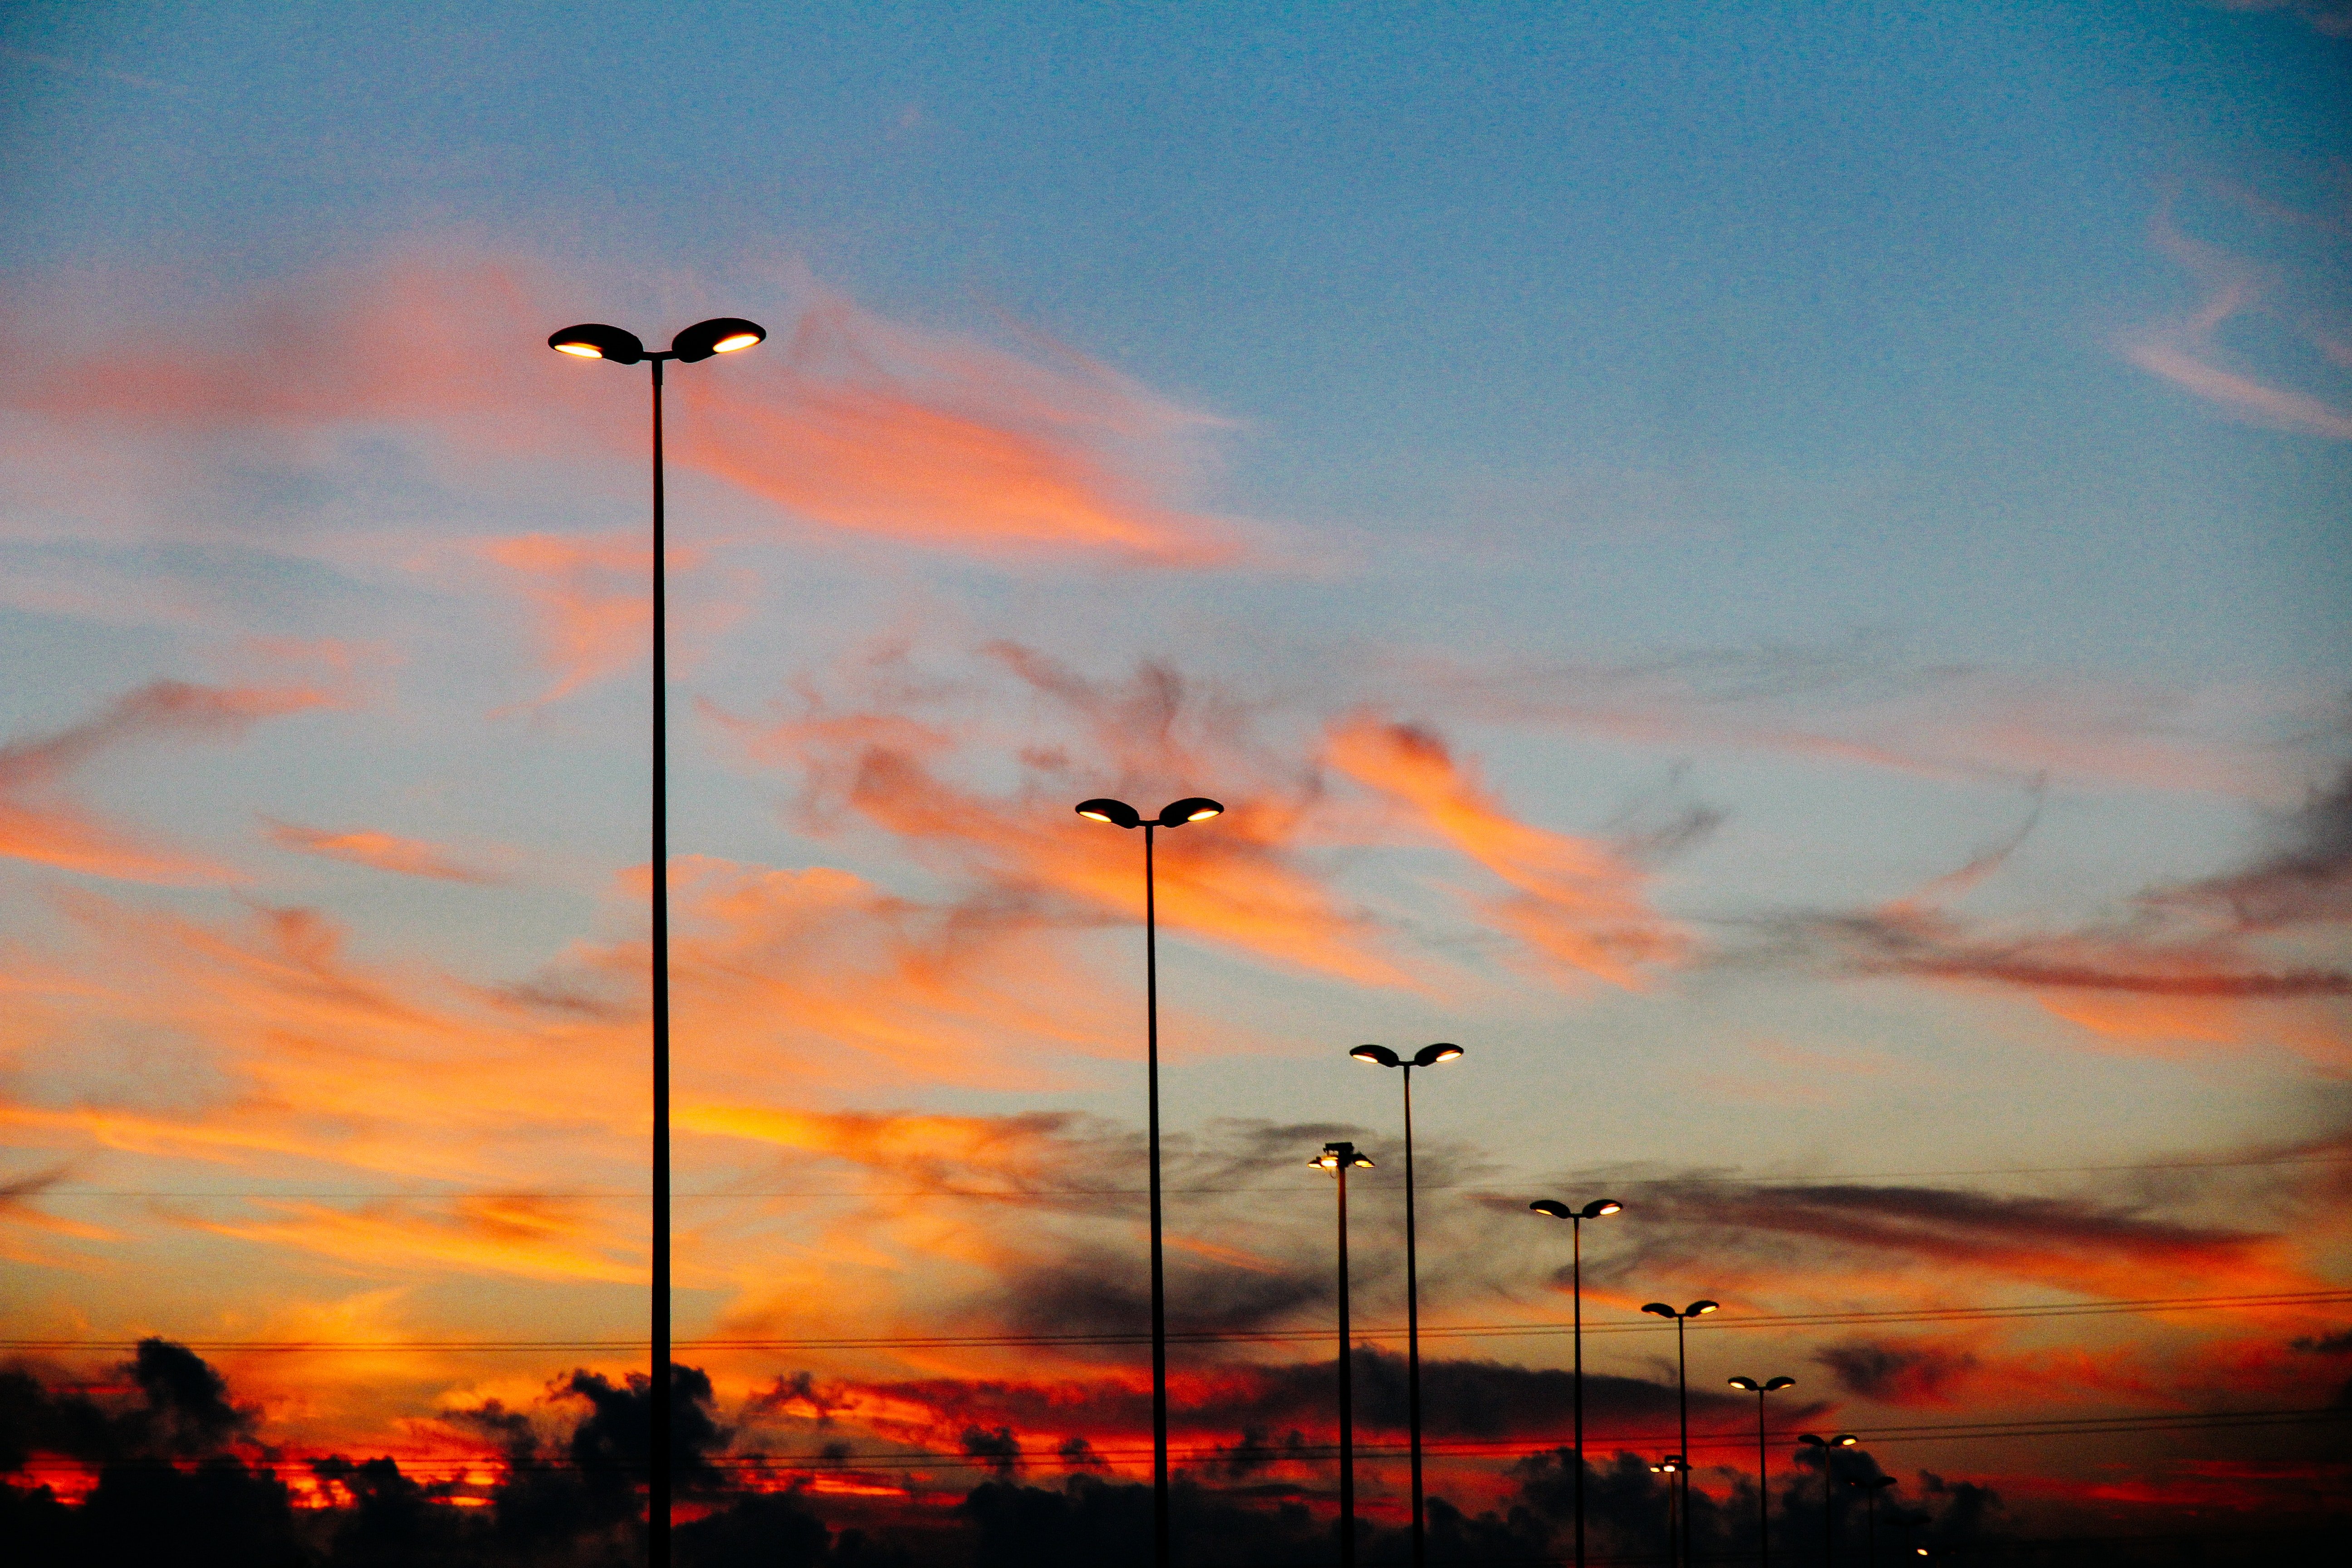 Street lamps in the sunset | Source: Pexels